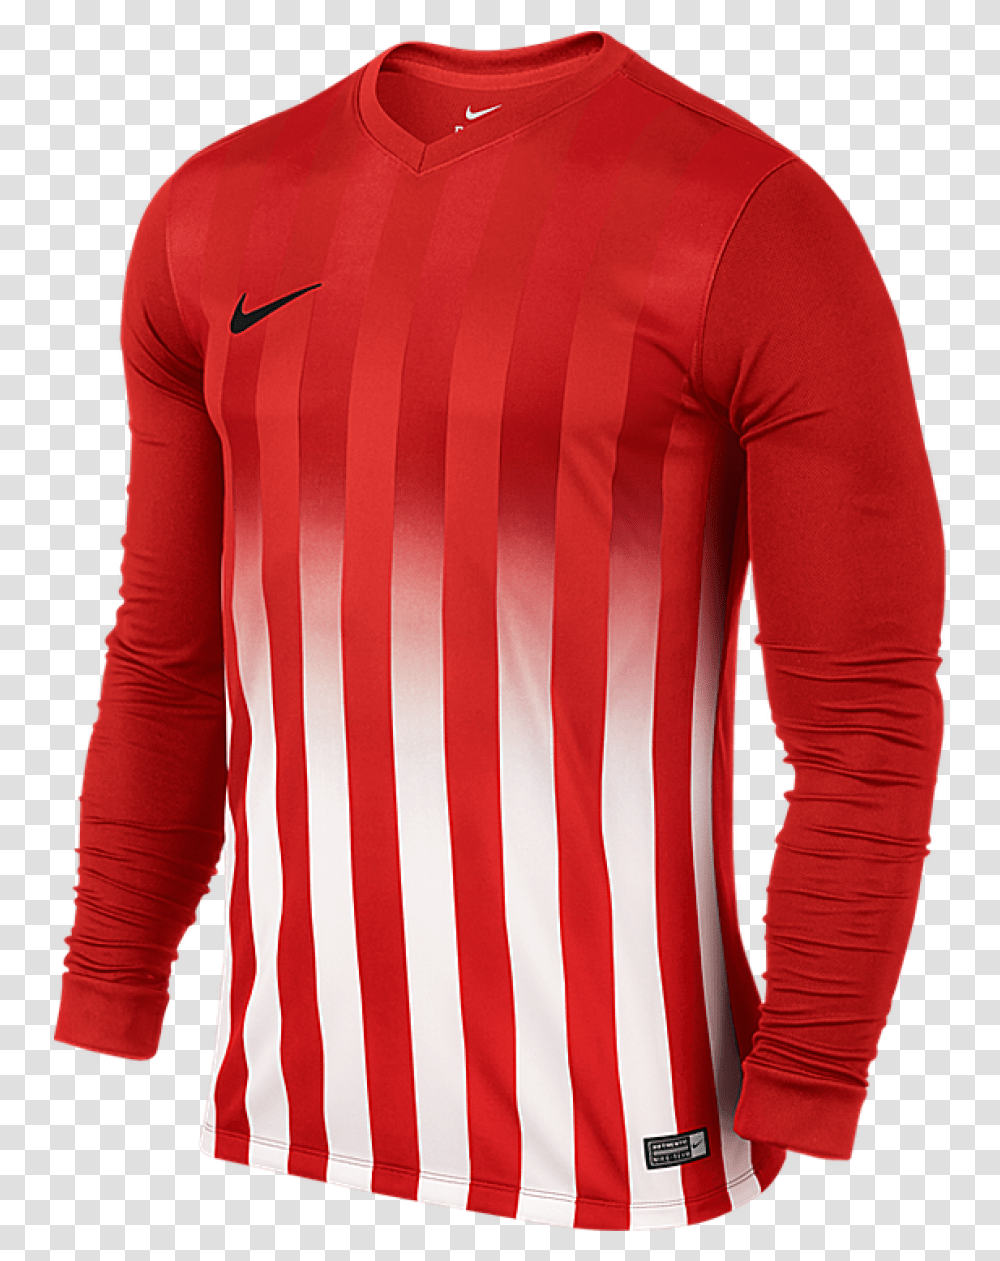 Nike Ls Striped Division Ii Tee Nike Striped Division Iii Jersey, Sleeve, Apparel, Long Sleeve Transparent Png